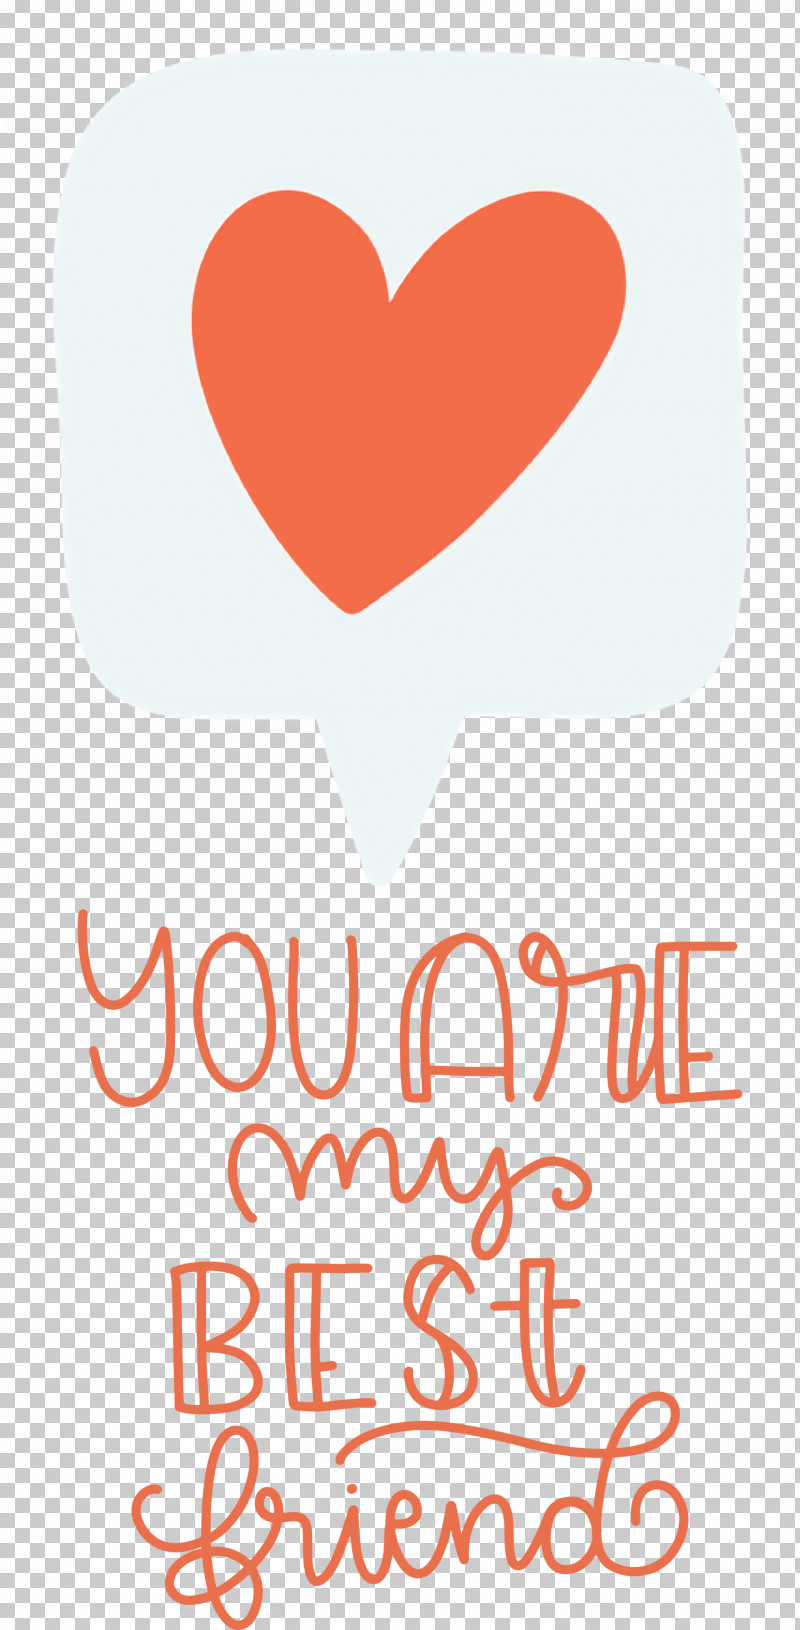 Best Friends You Are My Best Friends PNG, Clipart, Best Friends, Geometry, Heart, Line, Logo Free PNG Download